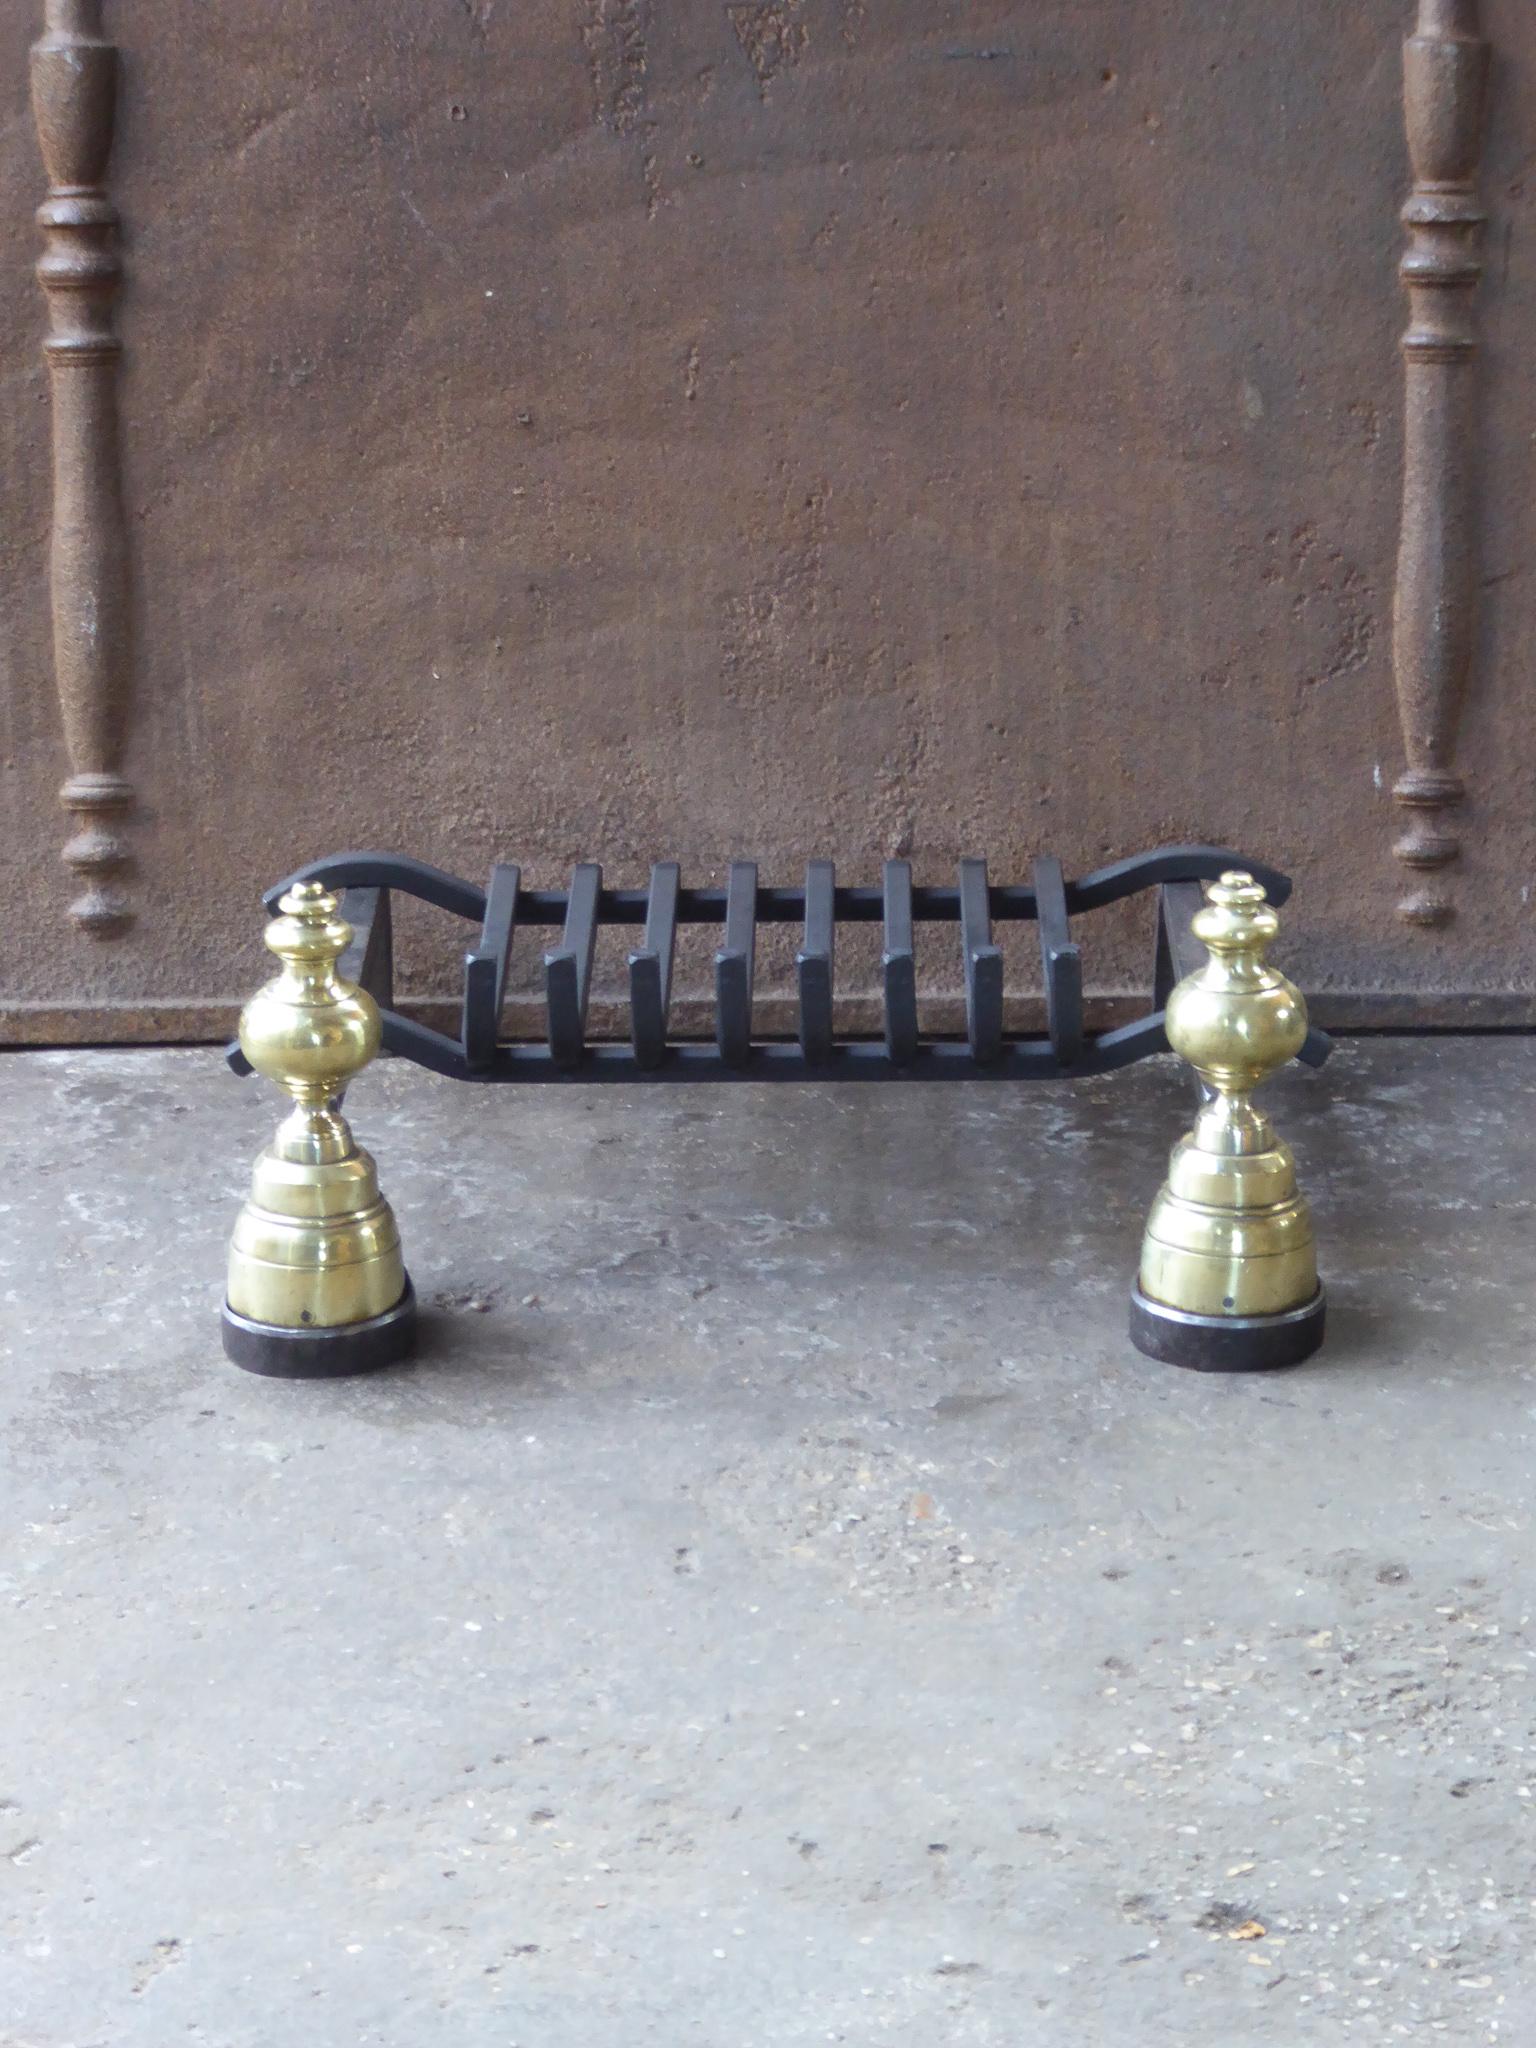 Late 19th or early 20th century French Napoleon III fireplace basket, fire basket made of wrought iron and brass. The basket is in a good condition and is fully functional.